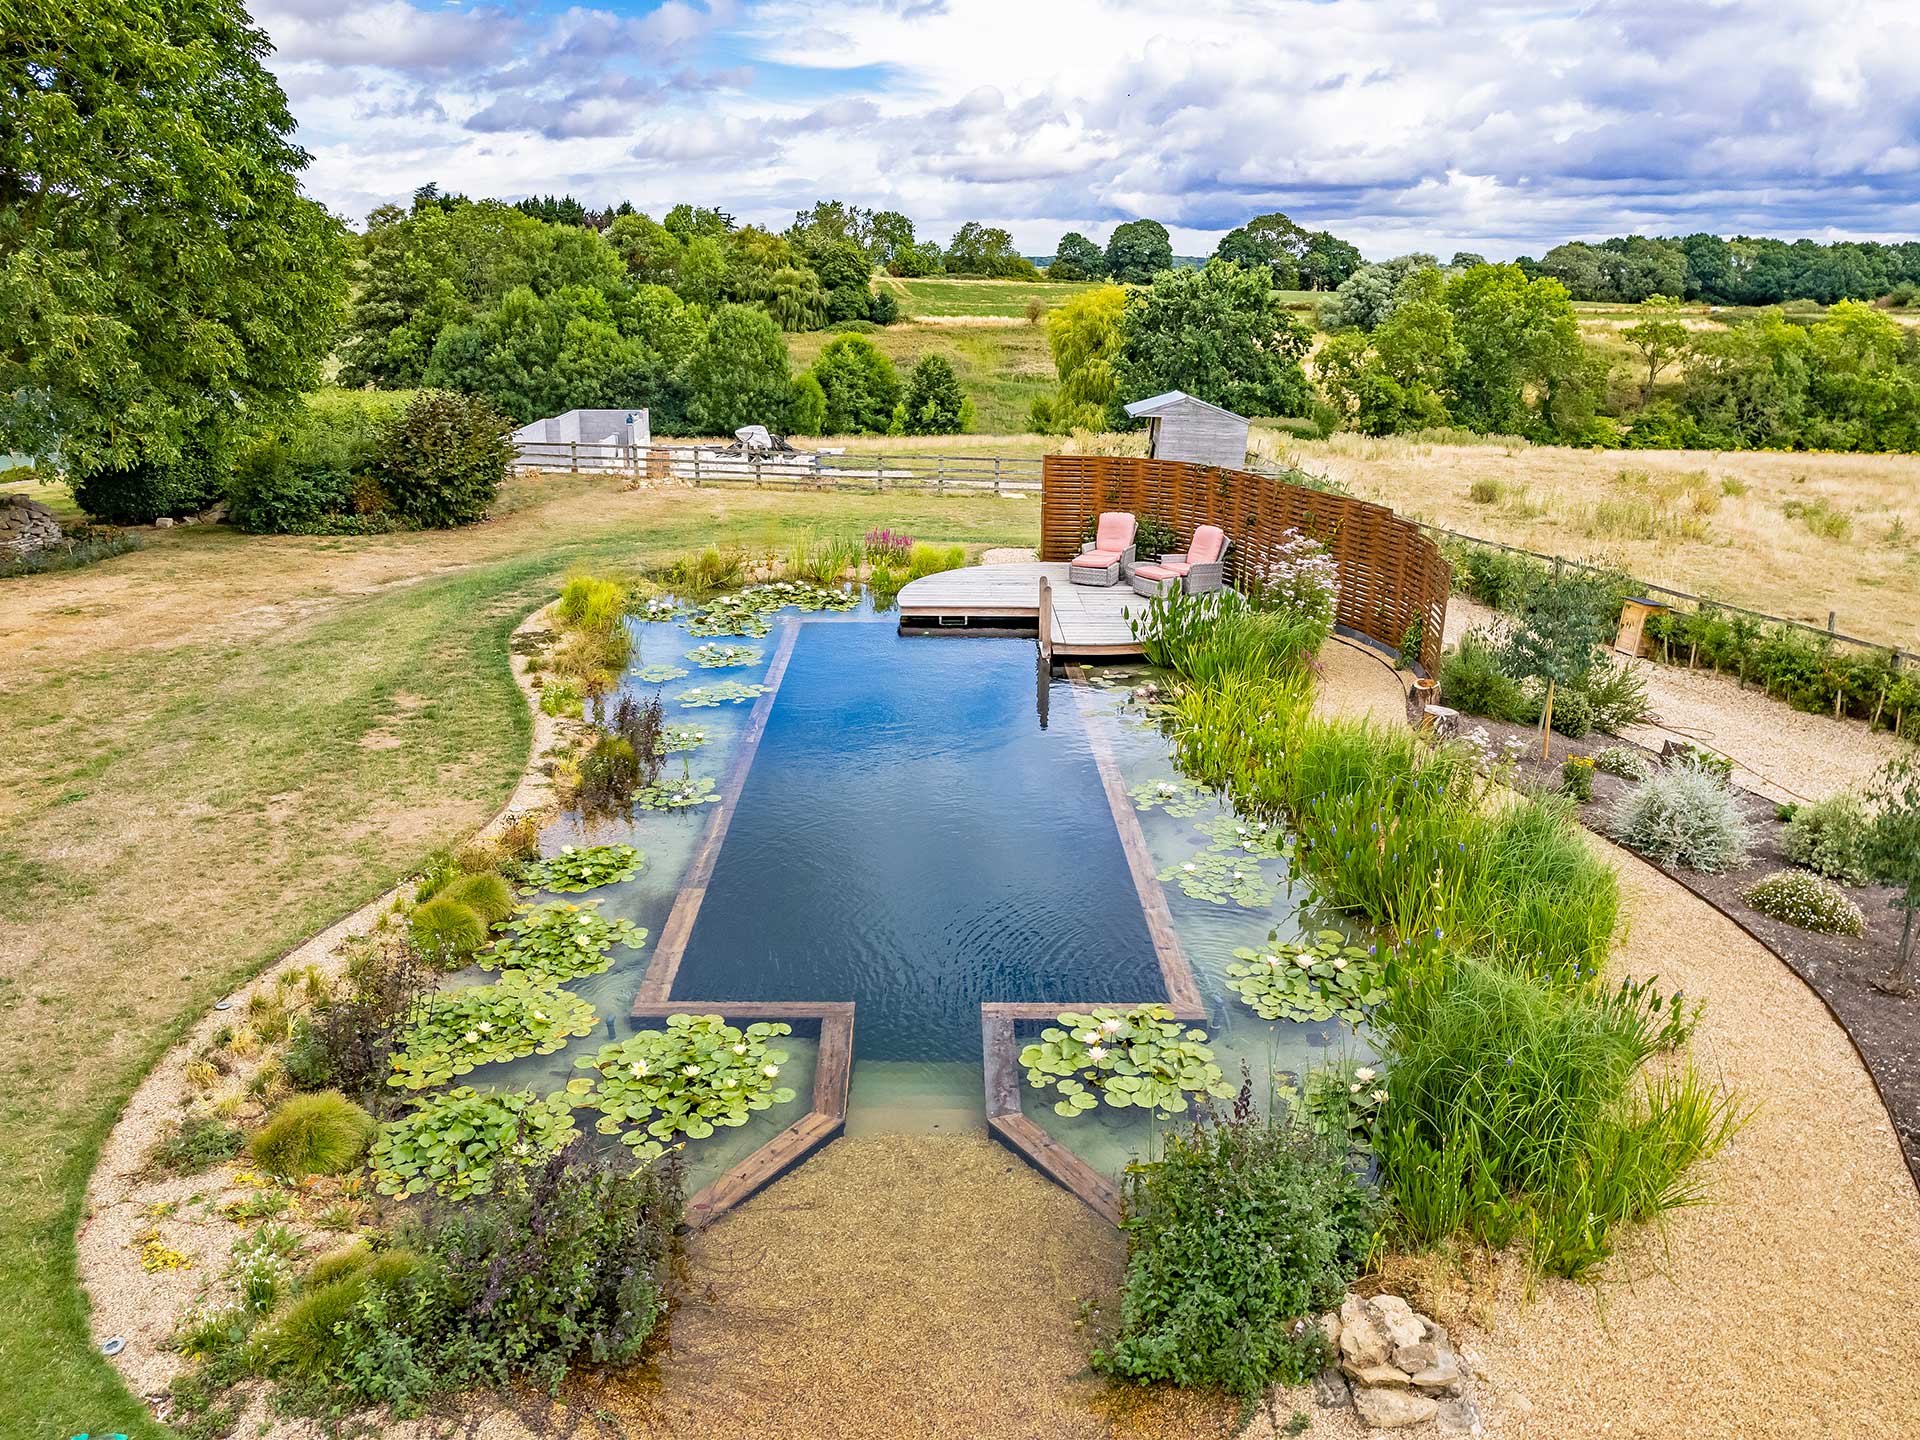 A huge benefit of Natural Swimming Pools is how clear the water is